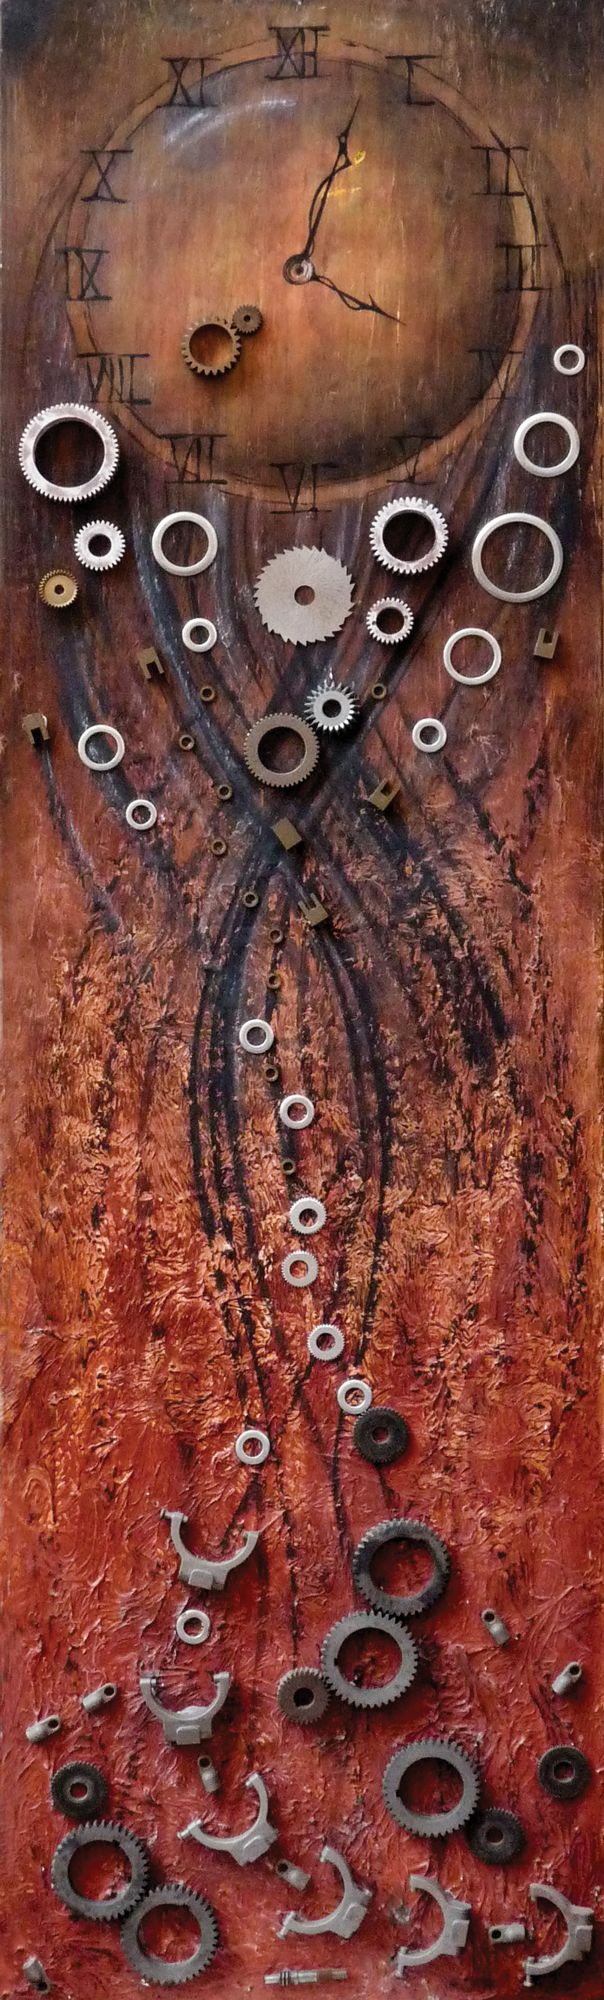 Rust - a Paint by Roberto Agnelli